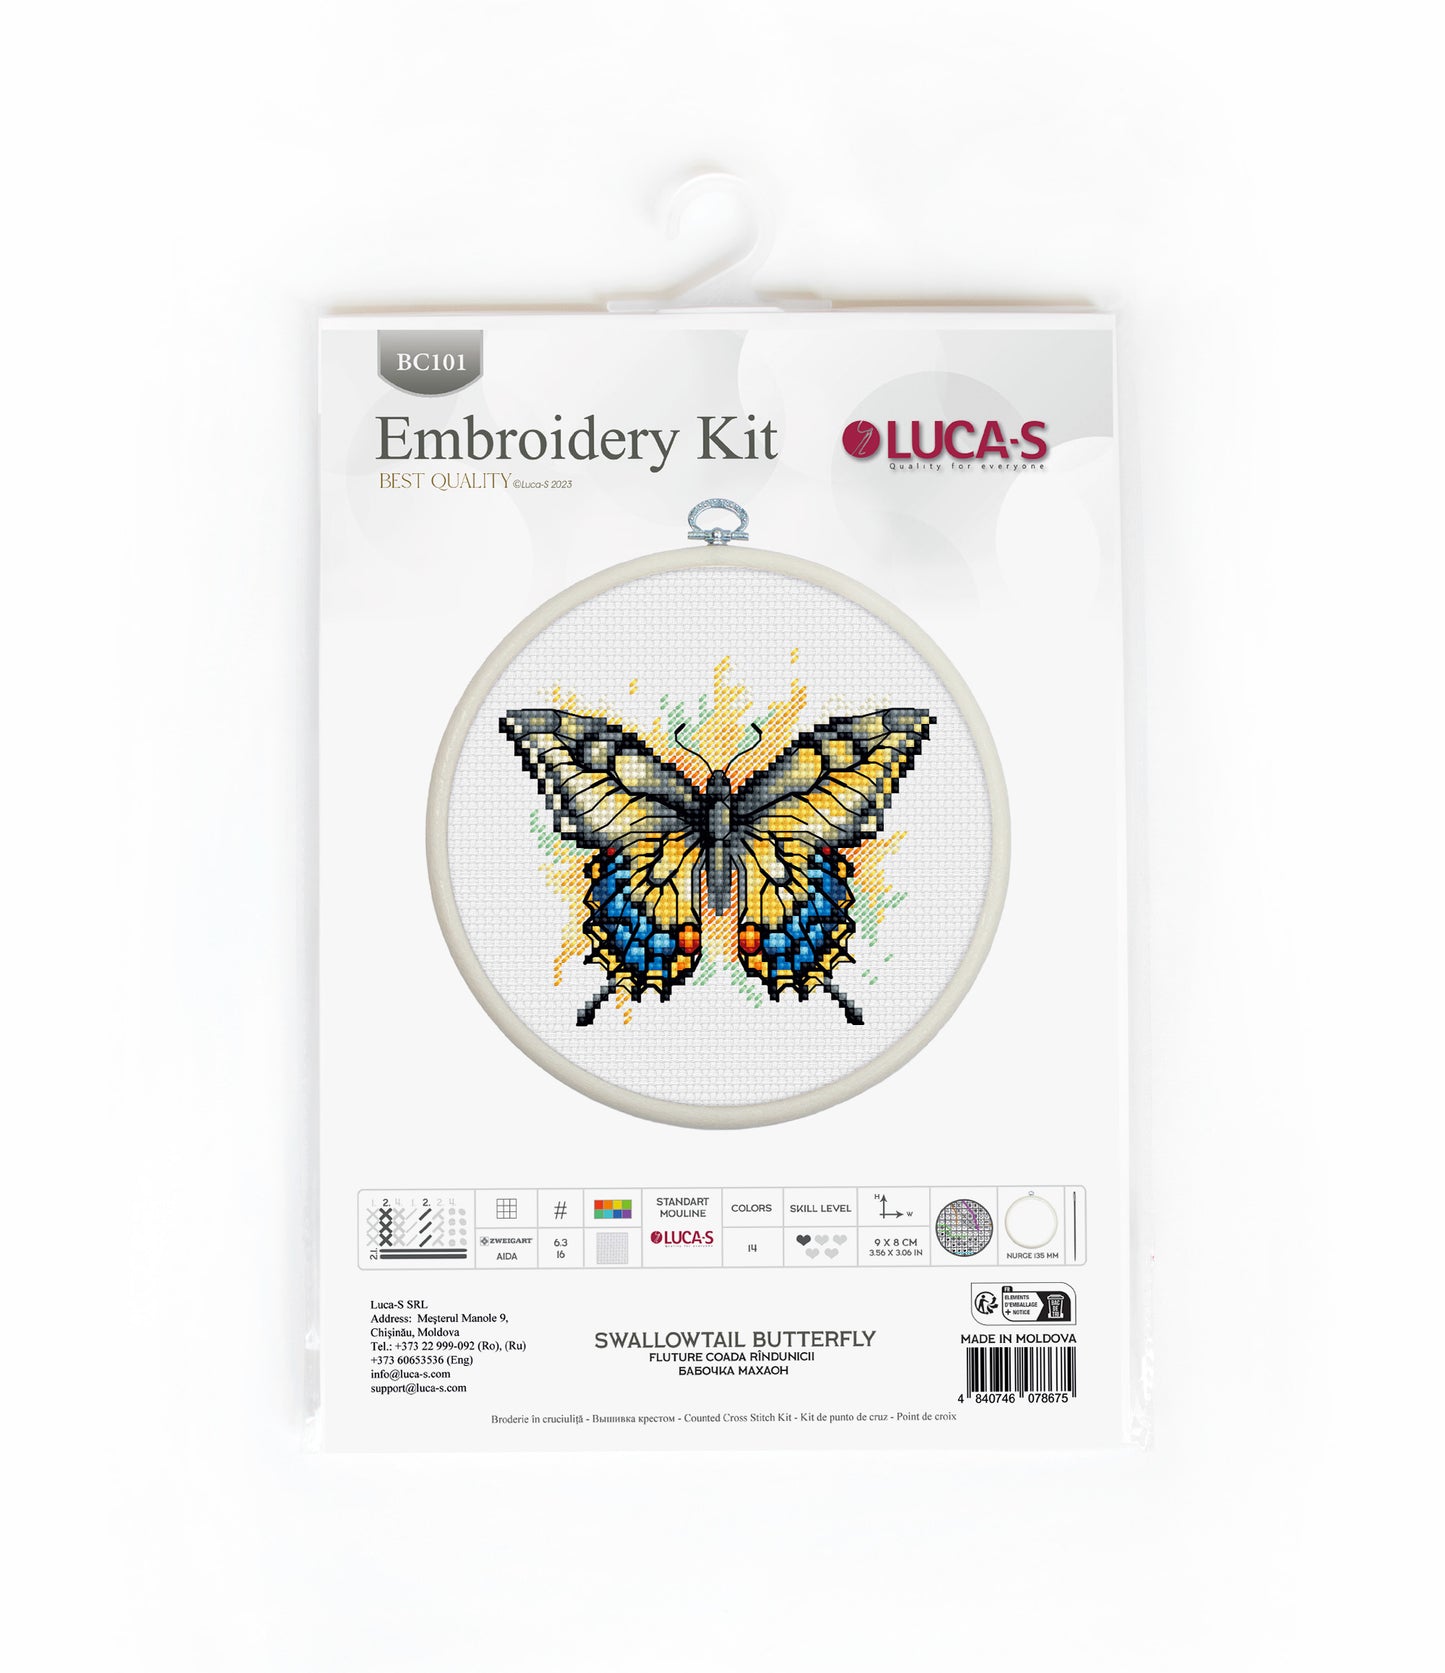 Cross Stitch Kit with Hoop Included Luca-S - Swallowtail Butterfly, BC101